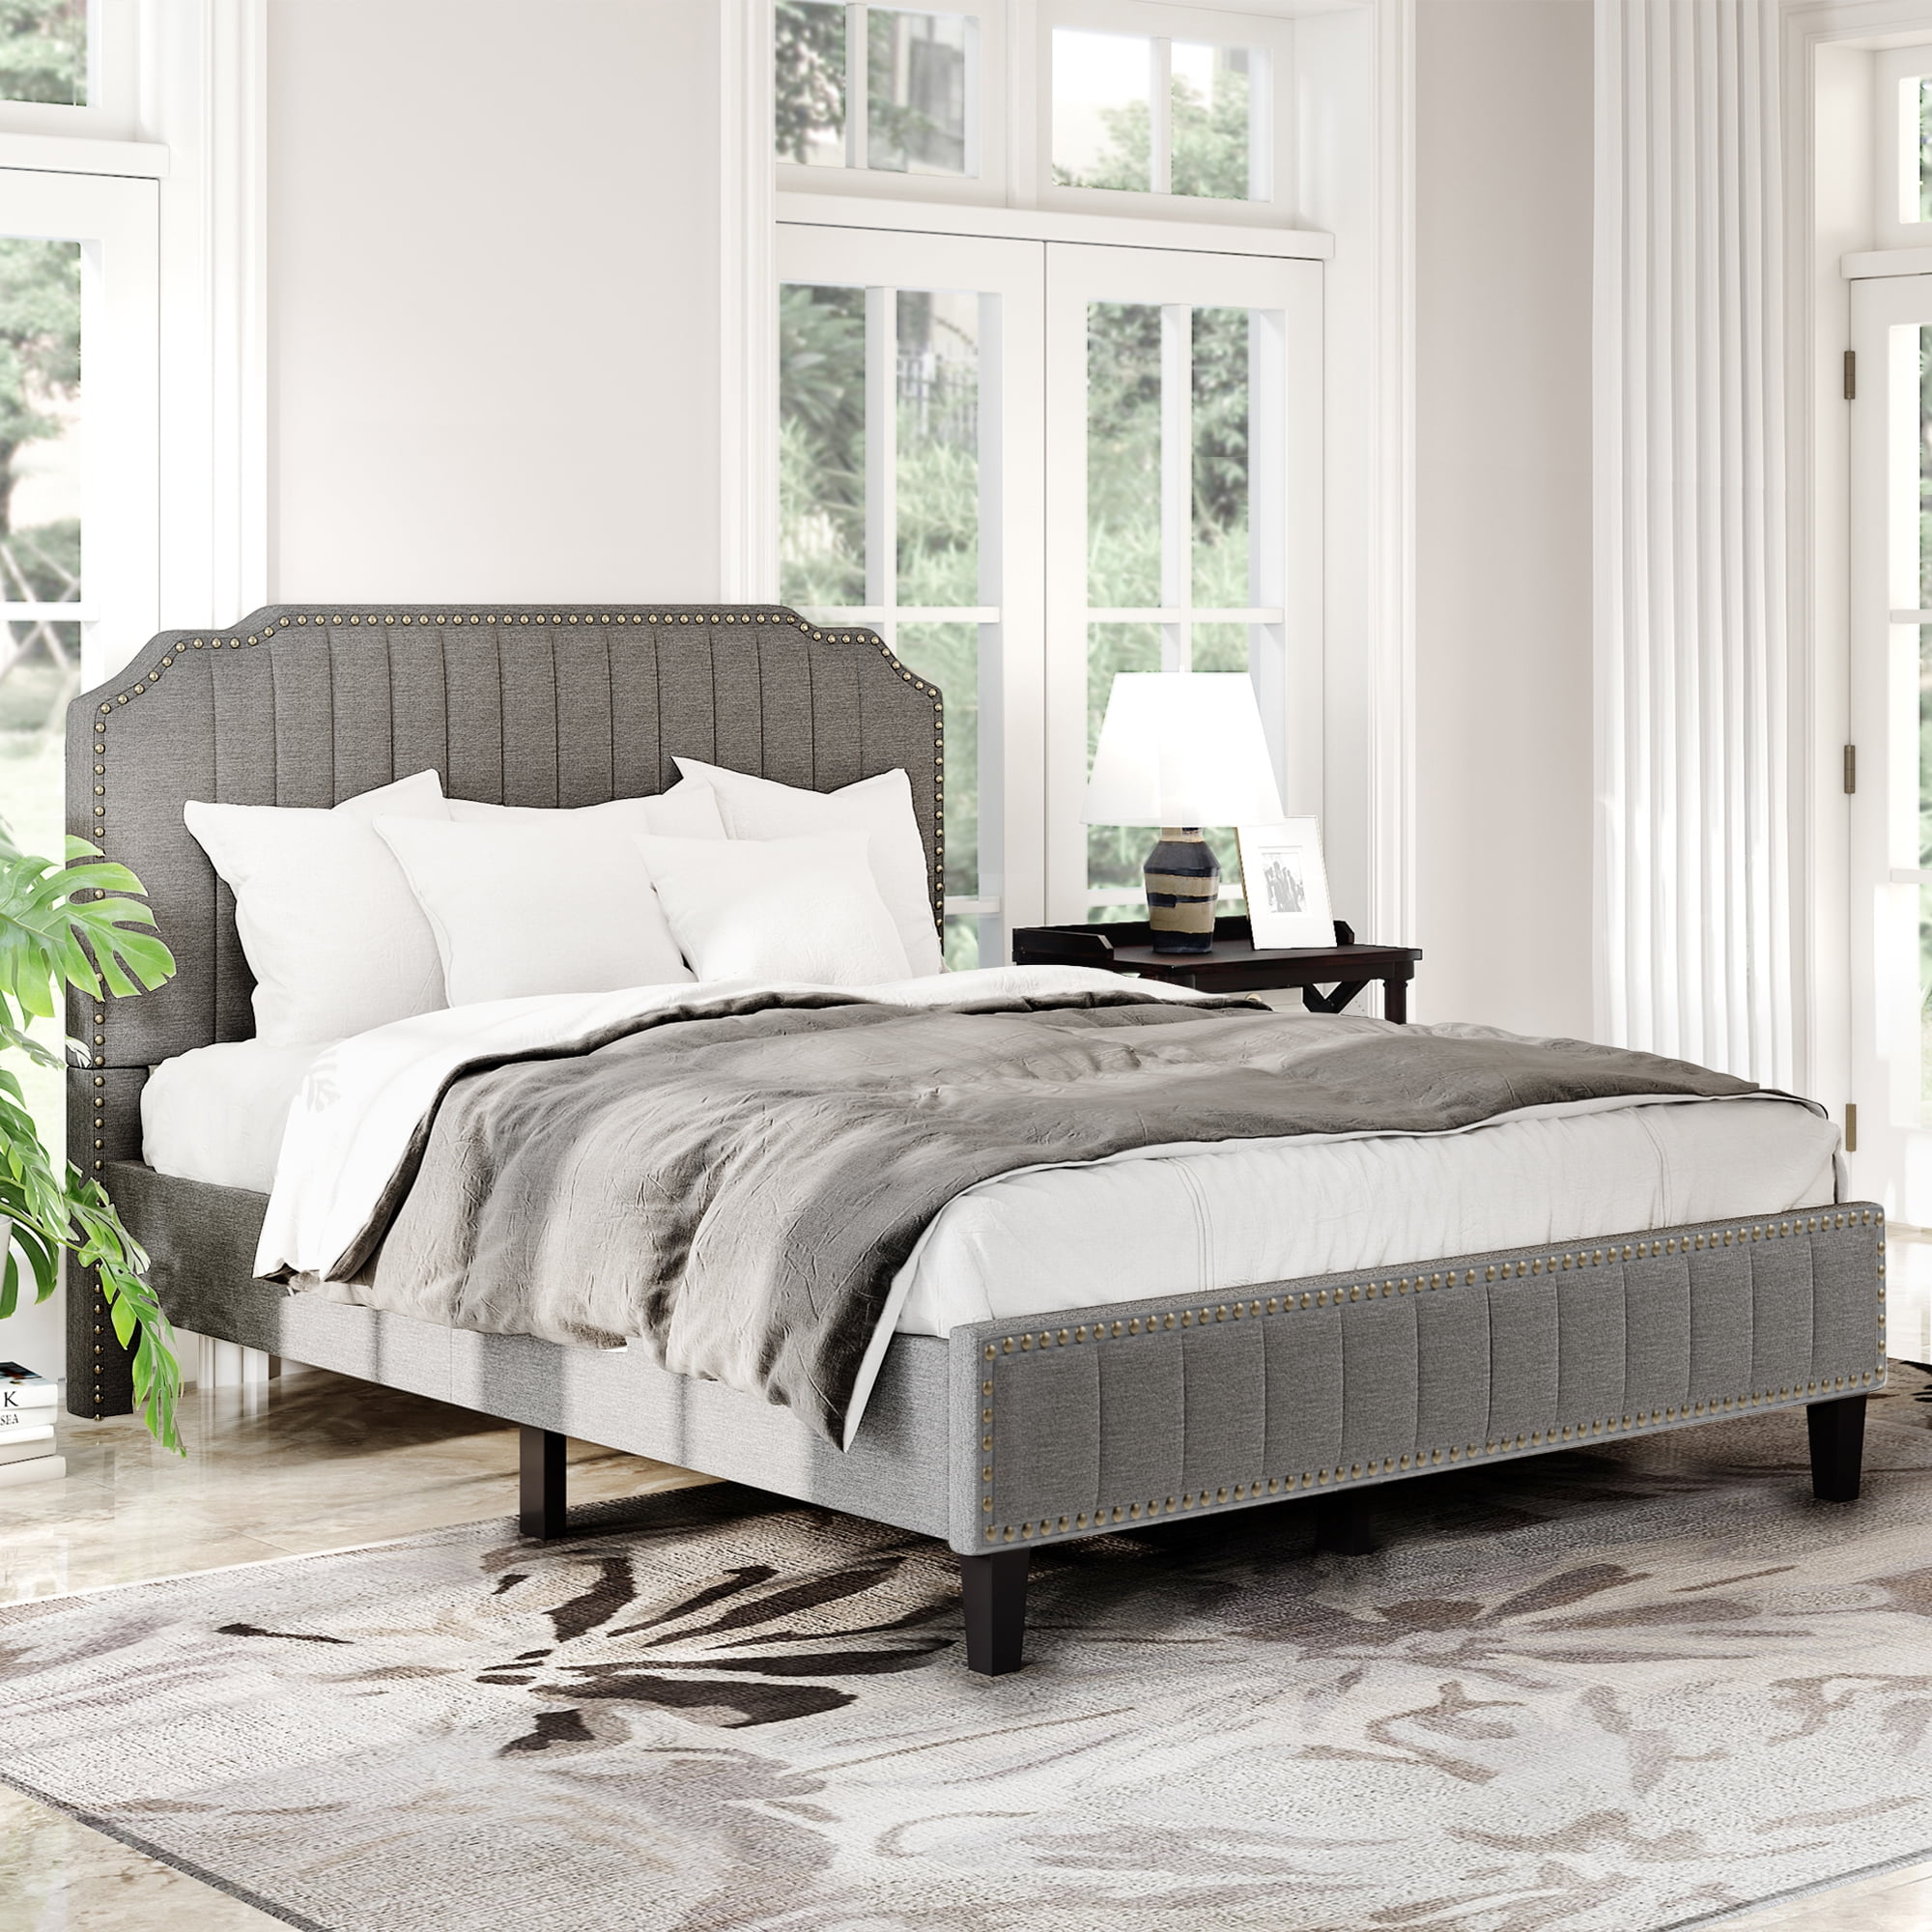 Queen Size Modern Linen Curved Upholstered Platform Bed, Solid Wood Frame,  Nailhead Trim (Cream/ Gray)